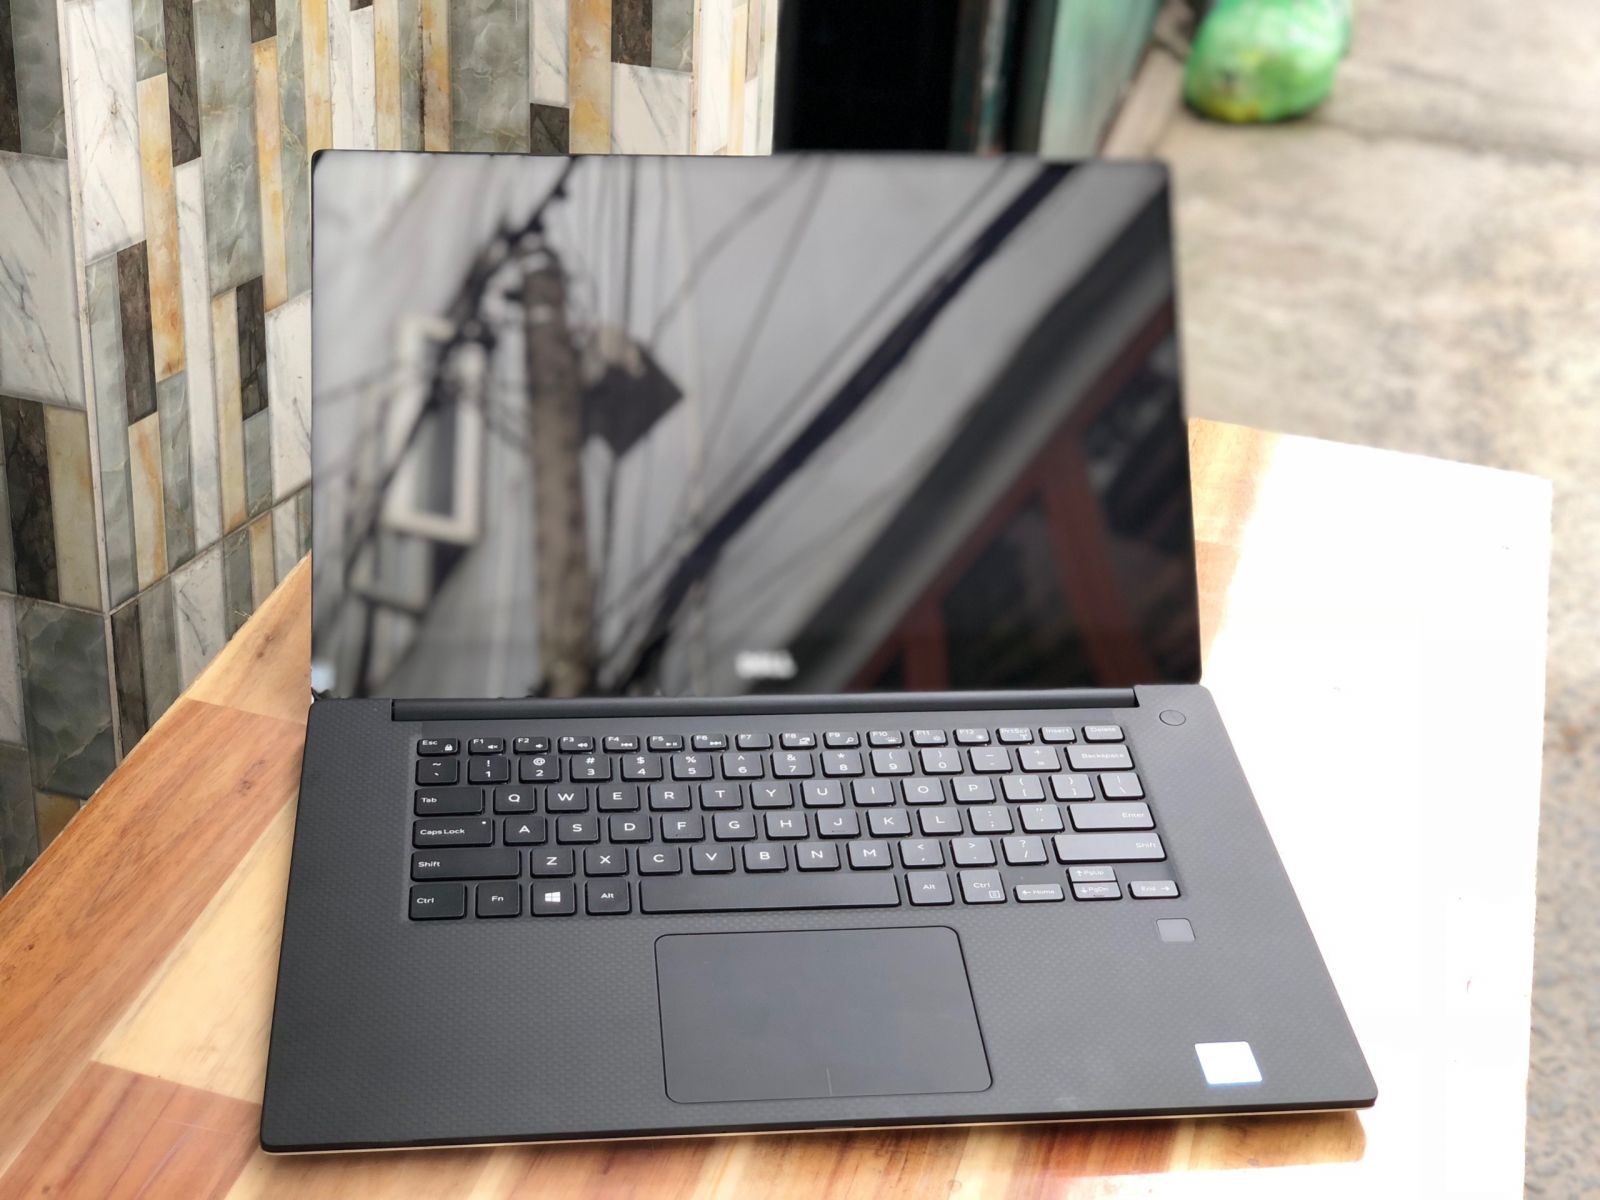 Dell xps 15 (9560) review: an impressive laptop with key upgrades and few flaws | windows central